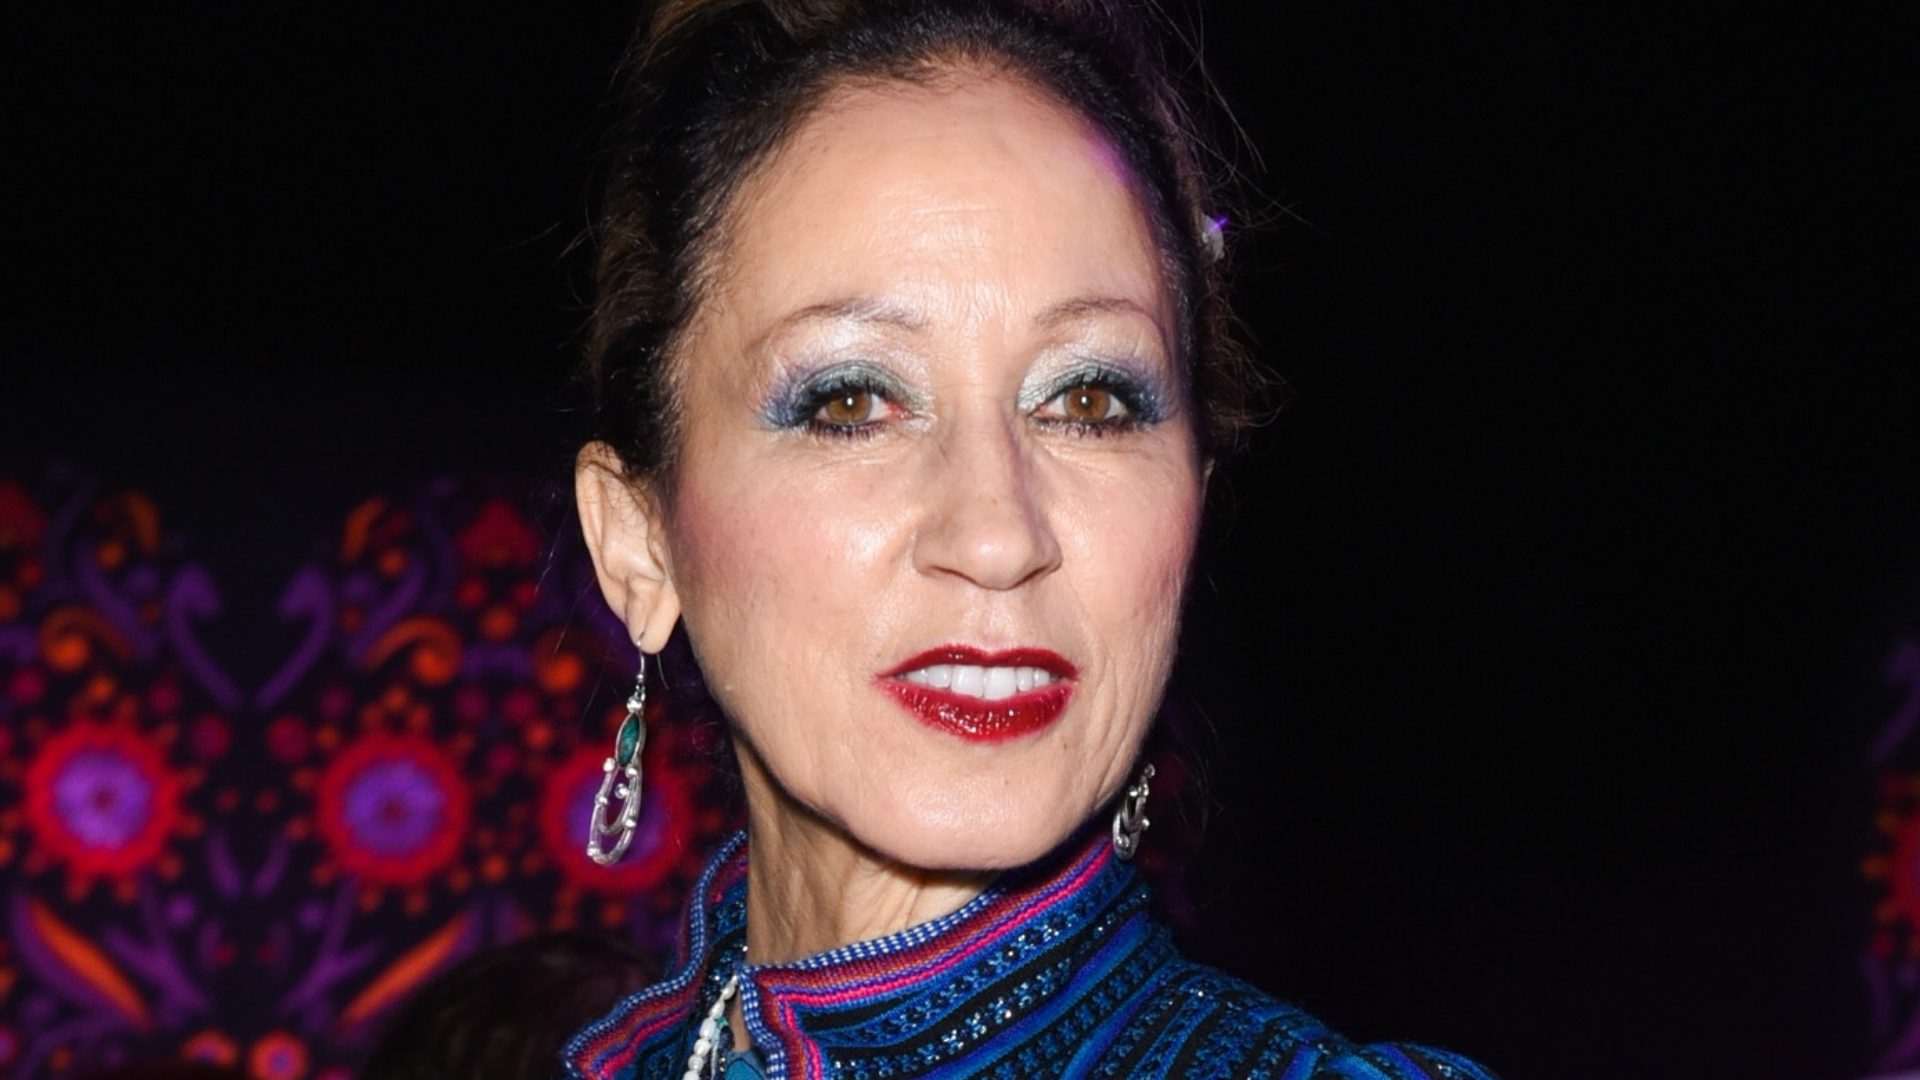 ESSENCE Best In Black Fashion Awards: Our 2019 Icon Award Honoree Is Pat Cleveland